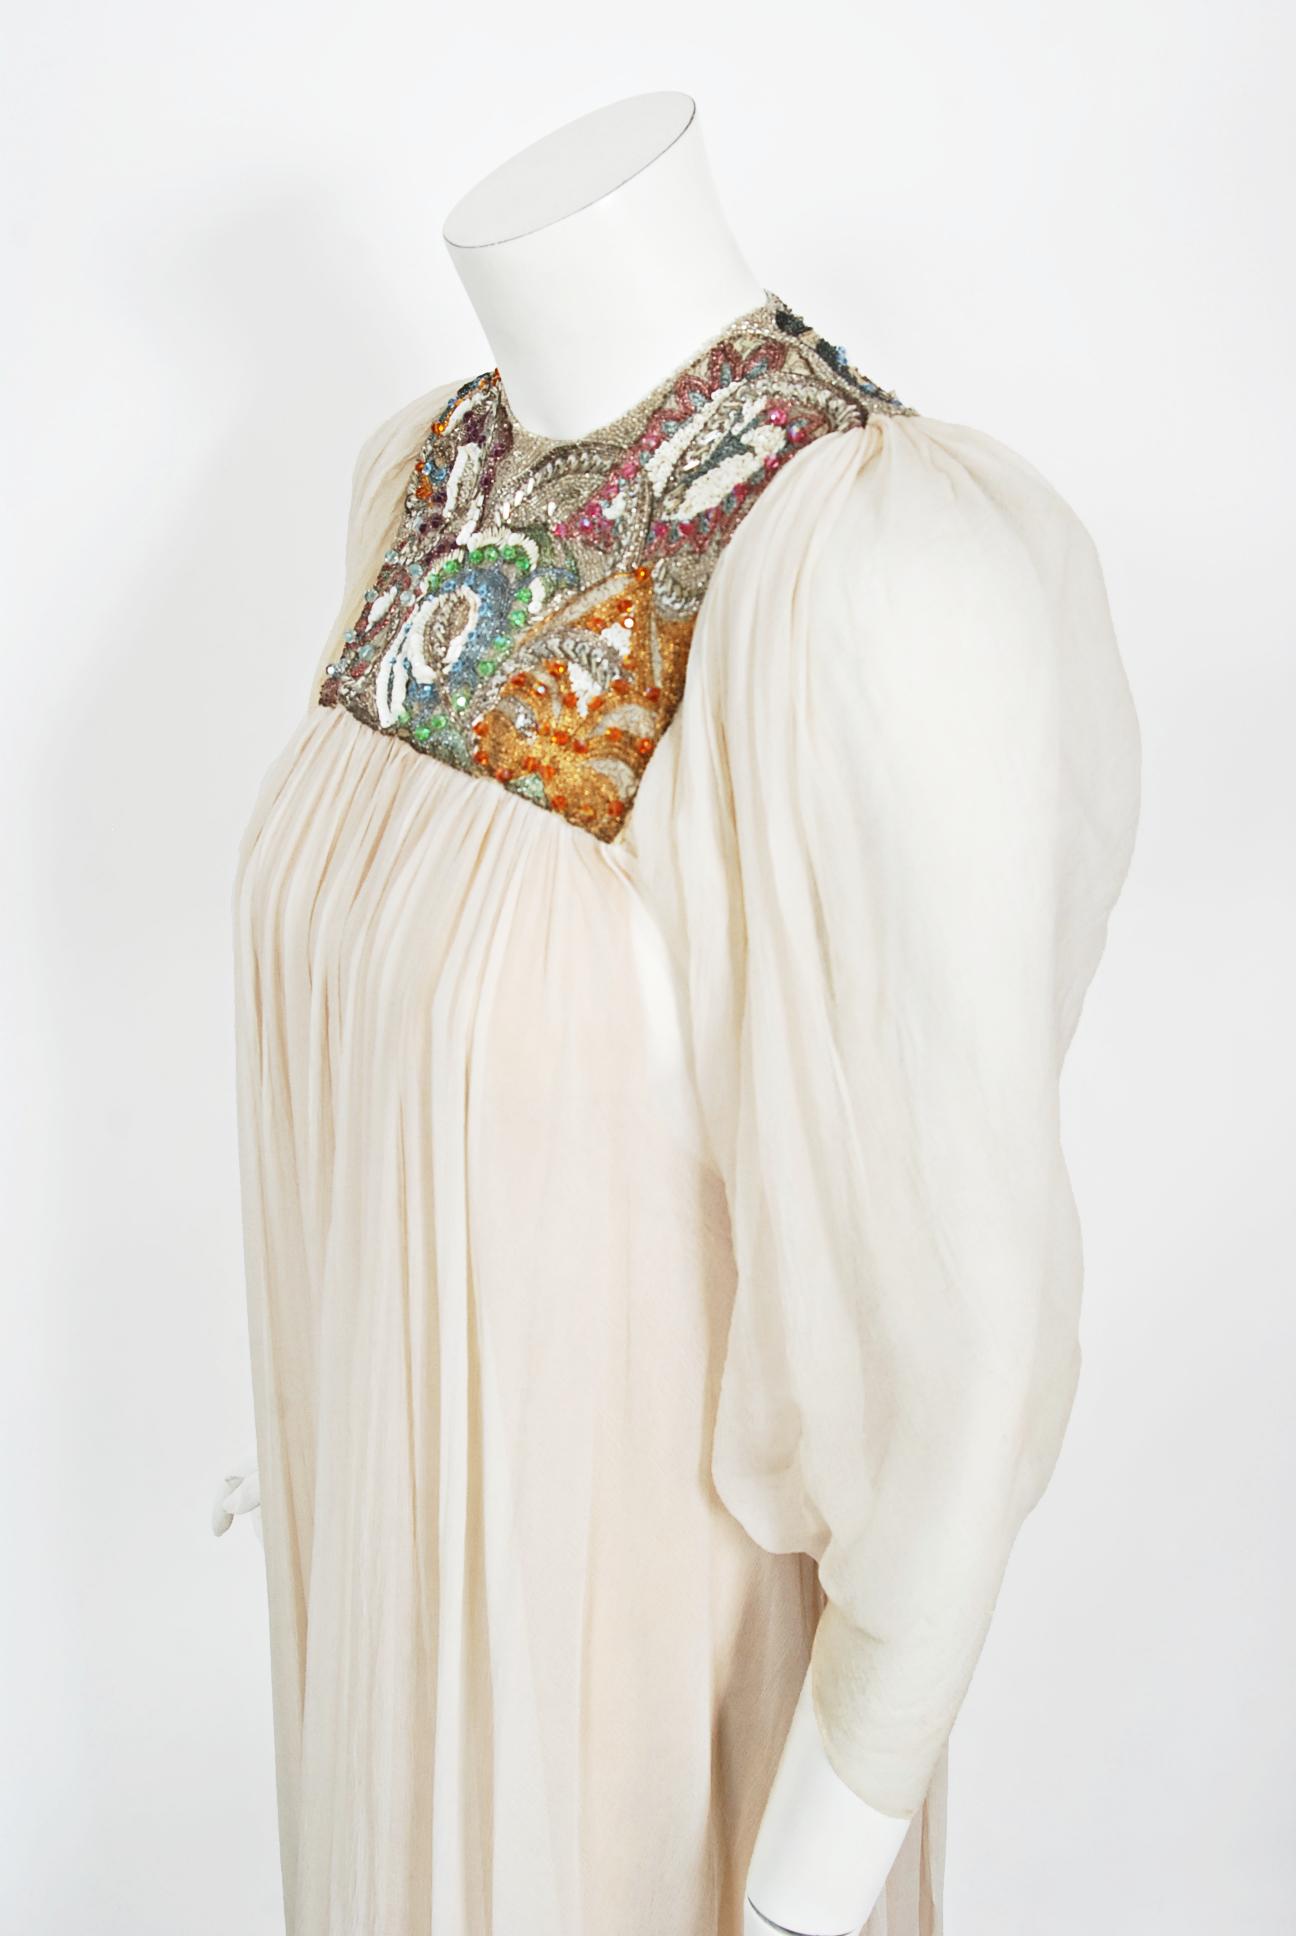 Women's 1970's Madame Grès Haute Couture Beaded Embroidered Ivory Sheer Silk Bridal Gown For Sale